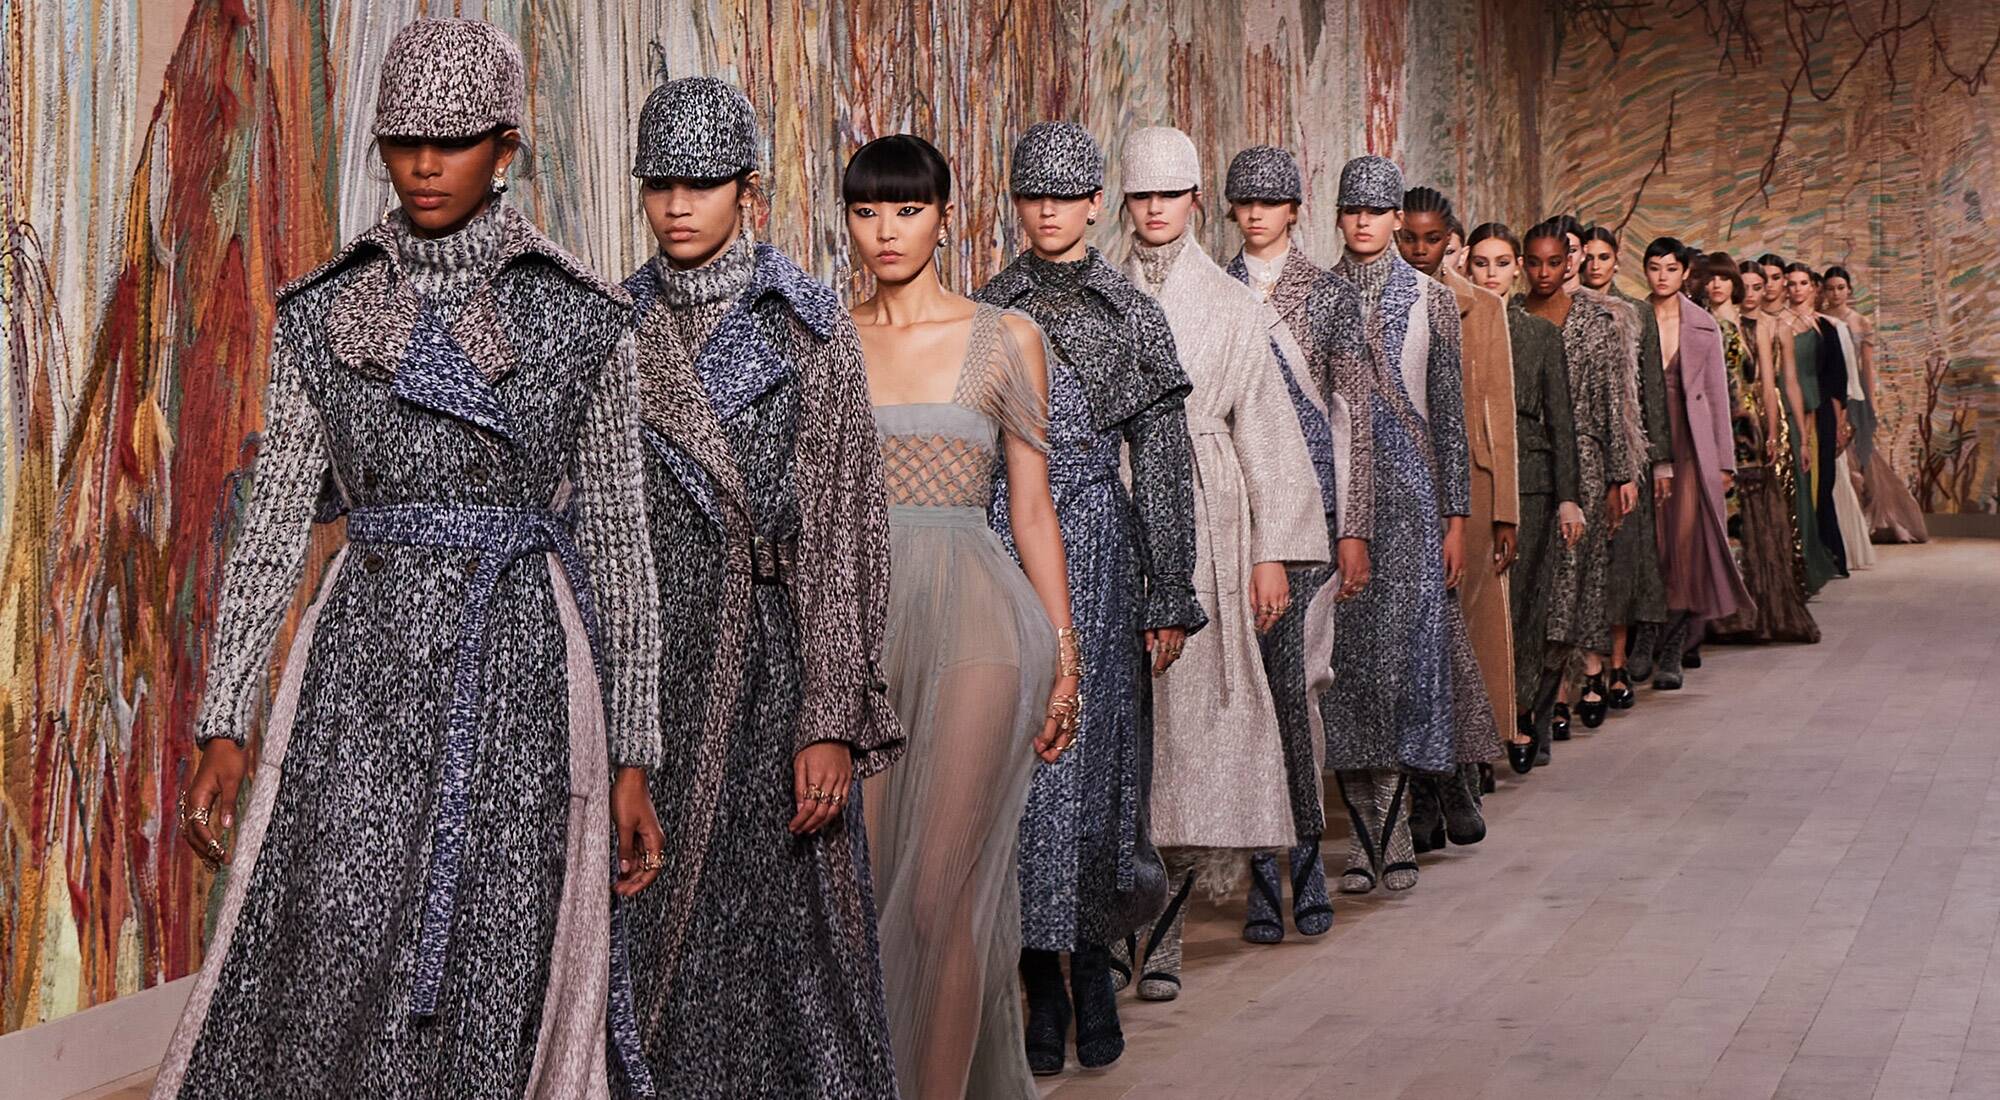 Christian Dior Fall 2022 Couture Collection